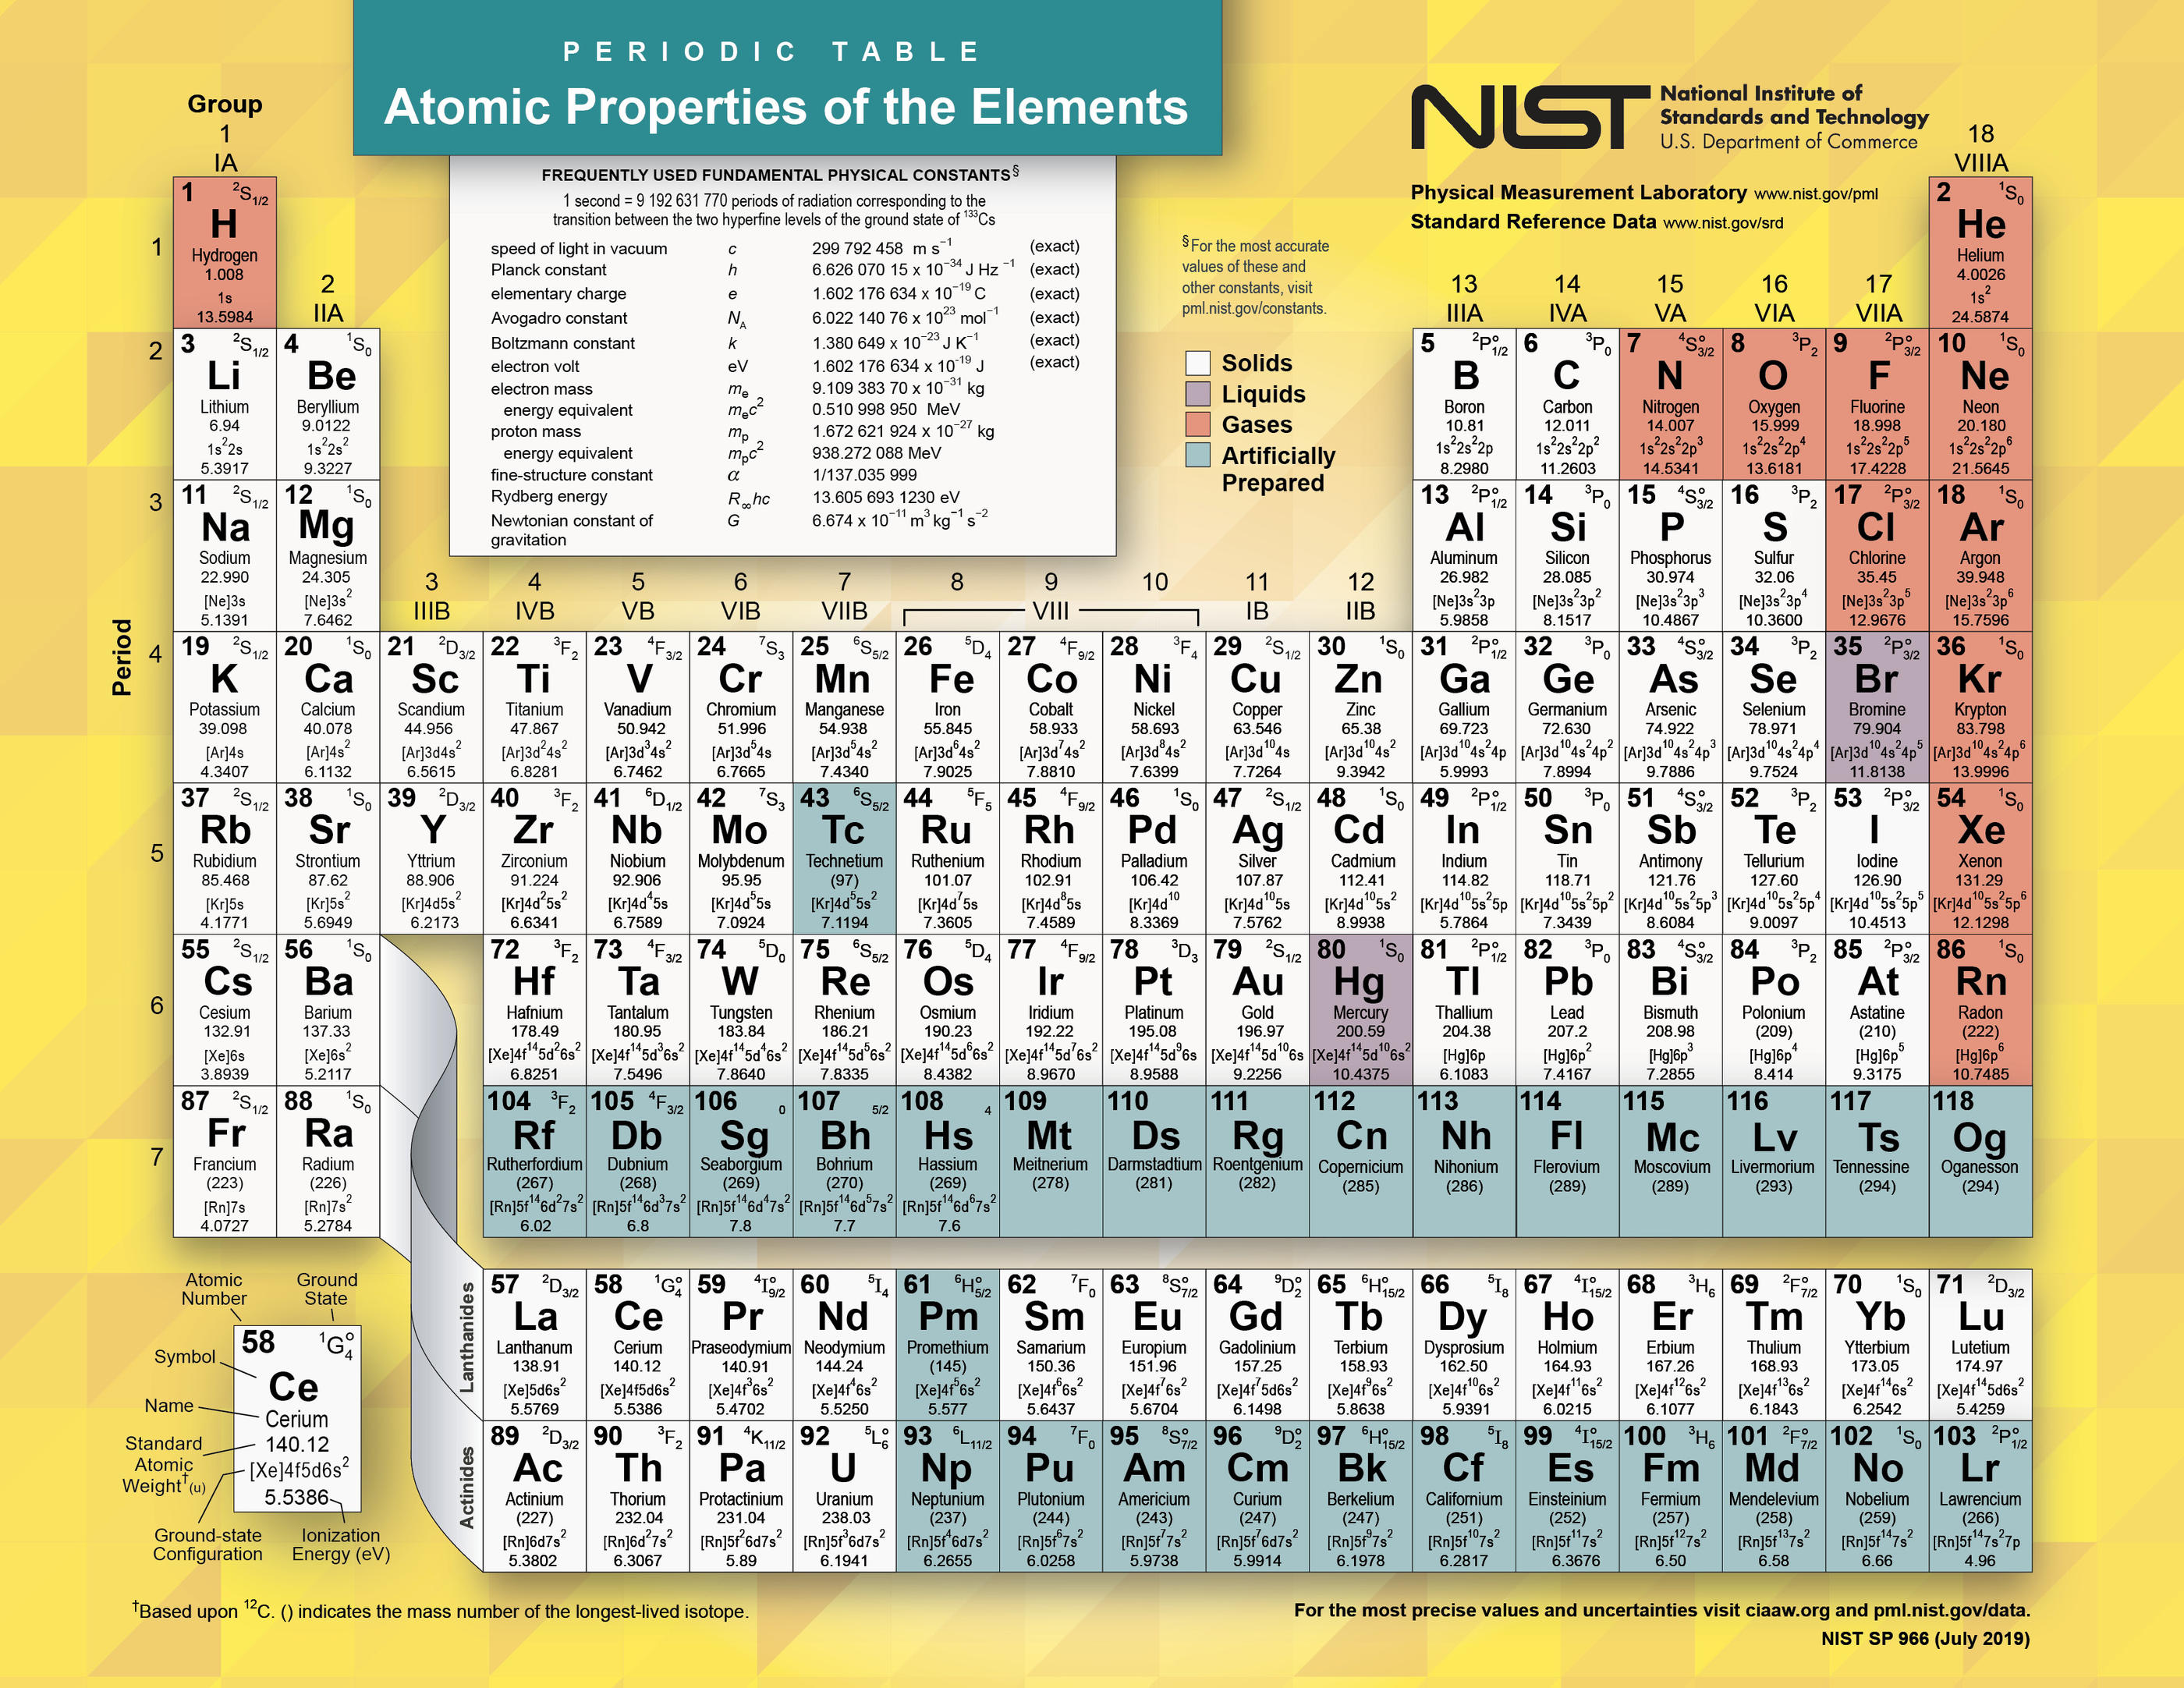 Just How Many Naturally Occurring Elements are there?